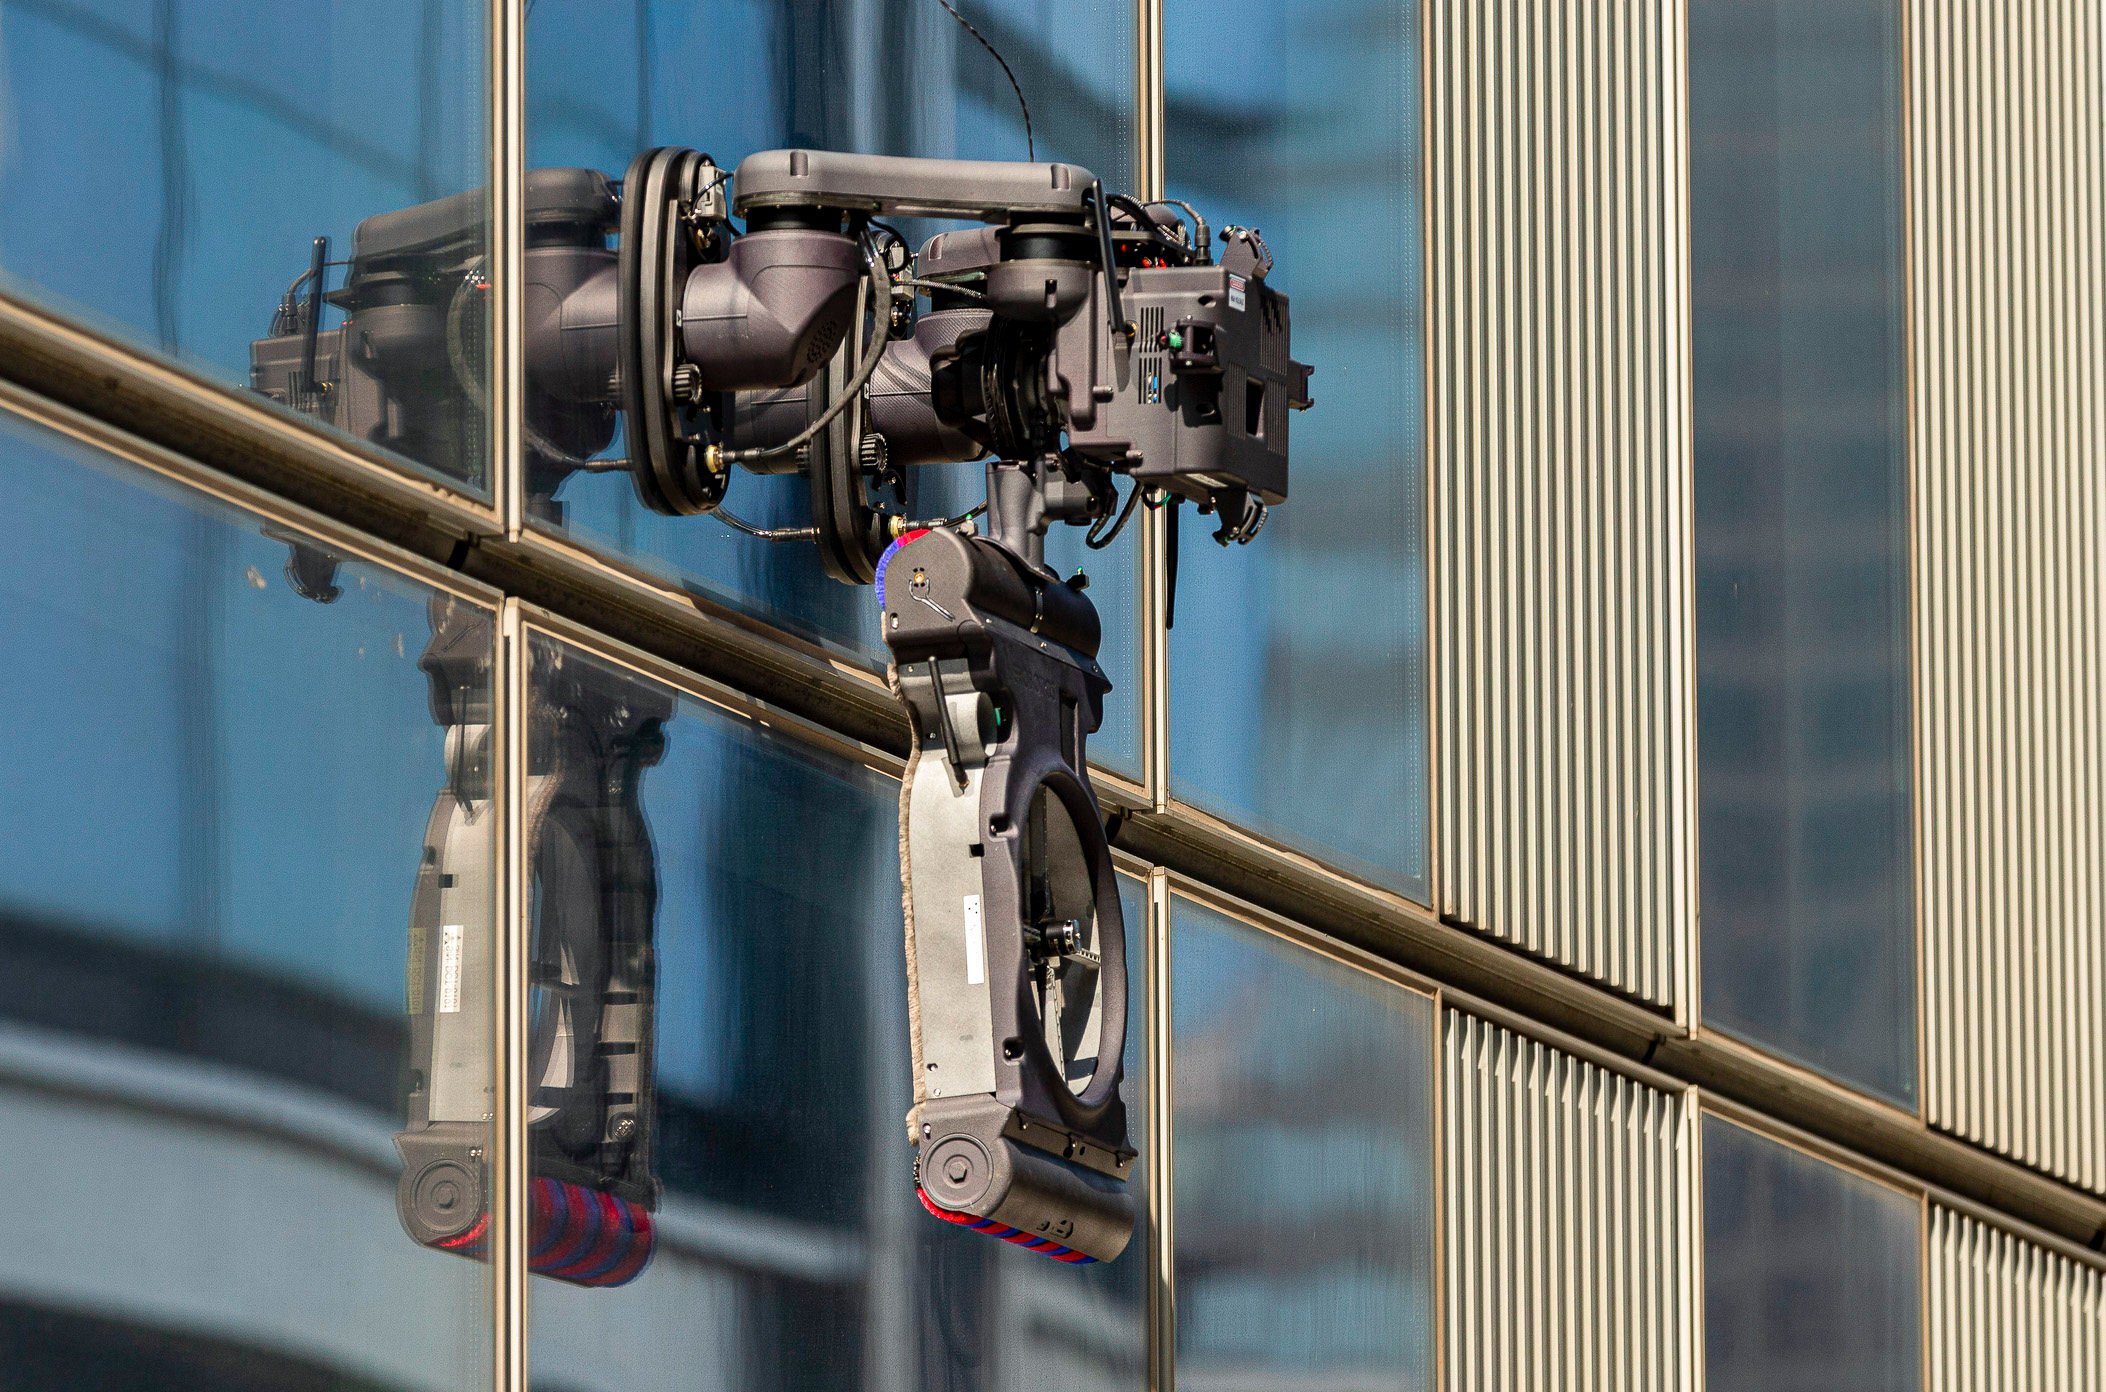 A close-up shot of the nine-kilogram, artificial intelligence-powered cleaning robot from Verobotics during a test on the facade of a high-rise building. Photo: Handout